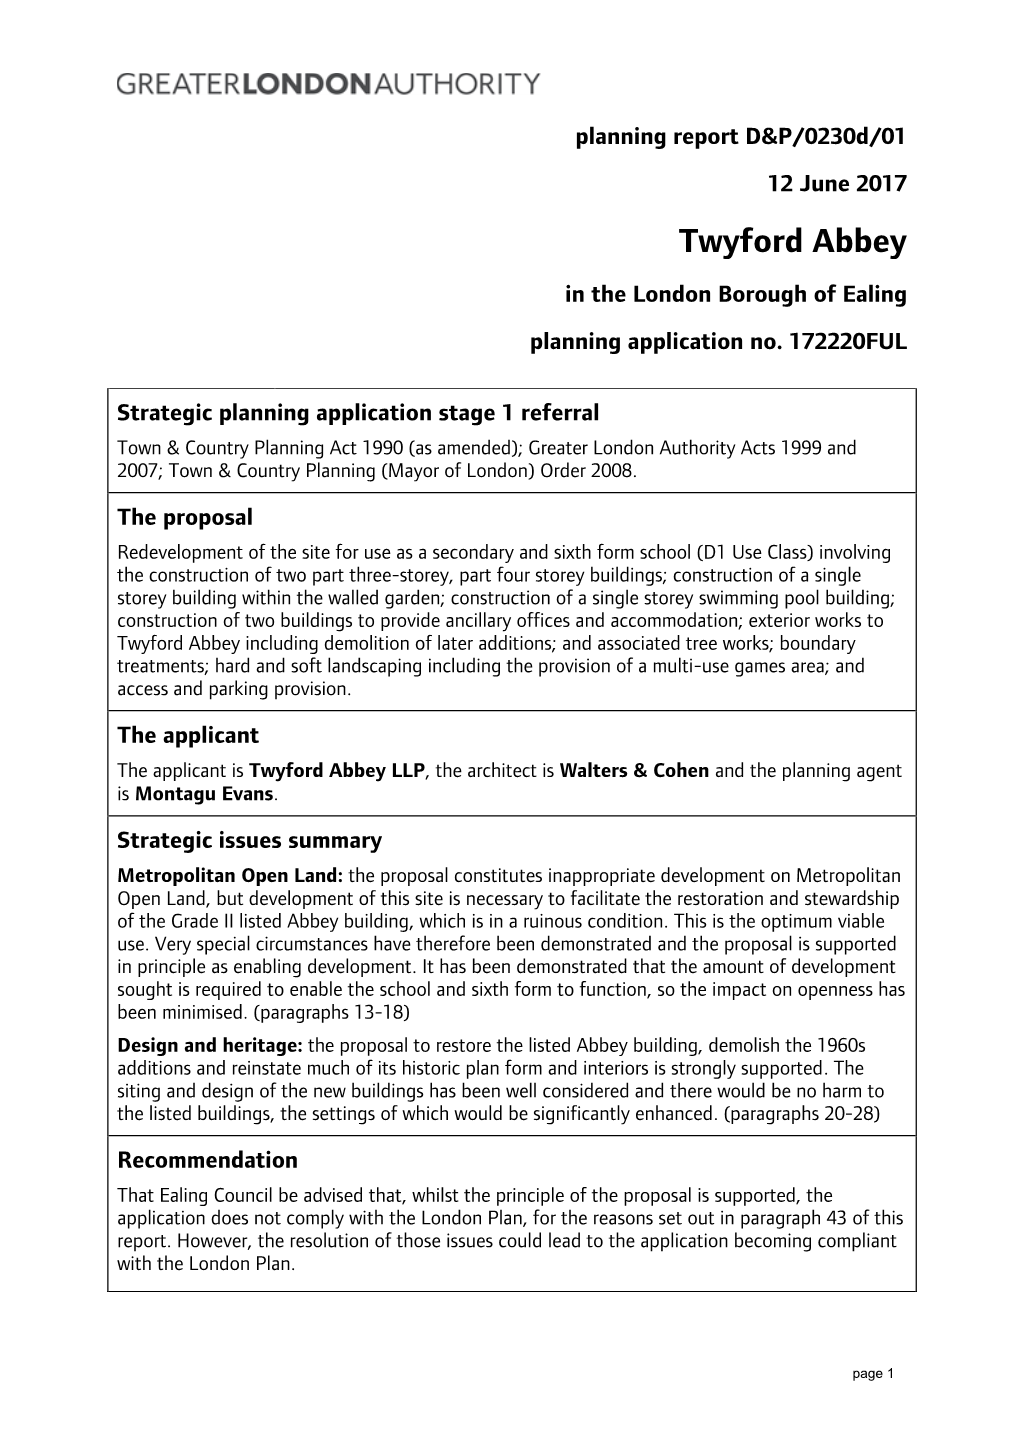 Twyford Abbey in the London Borough of Ealing Planning Application No